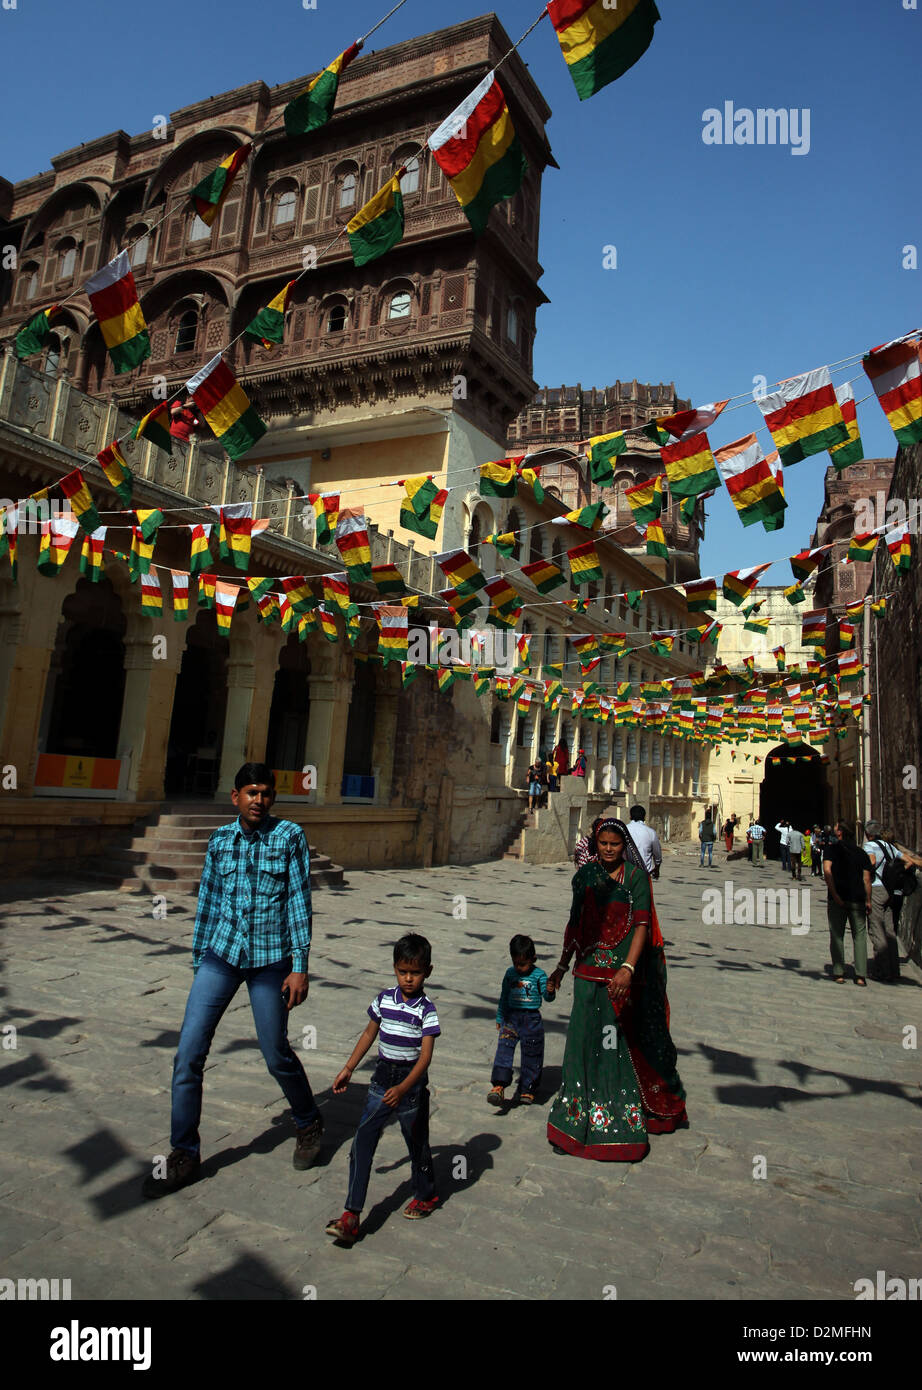 General view of India flags decorating the courtyard of the Mehrangarh Fort in Jodhpur, Rajasthan, India Stock Photo